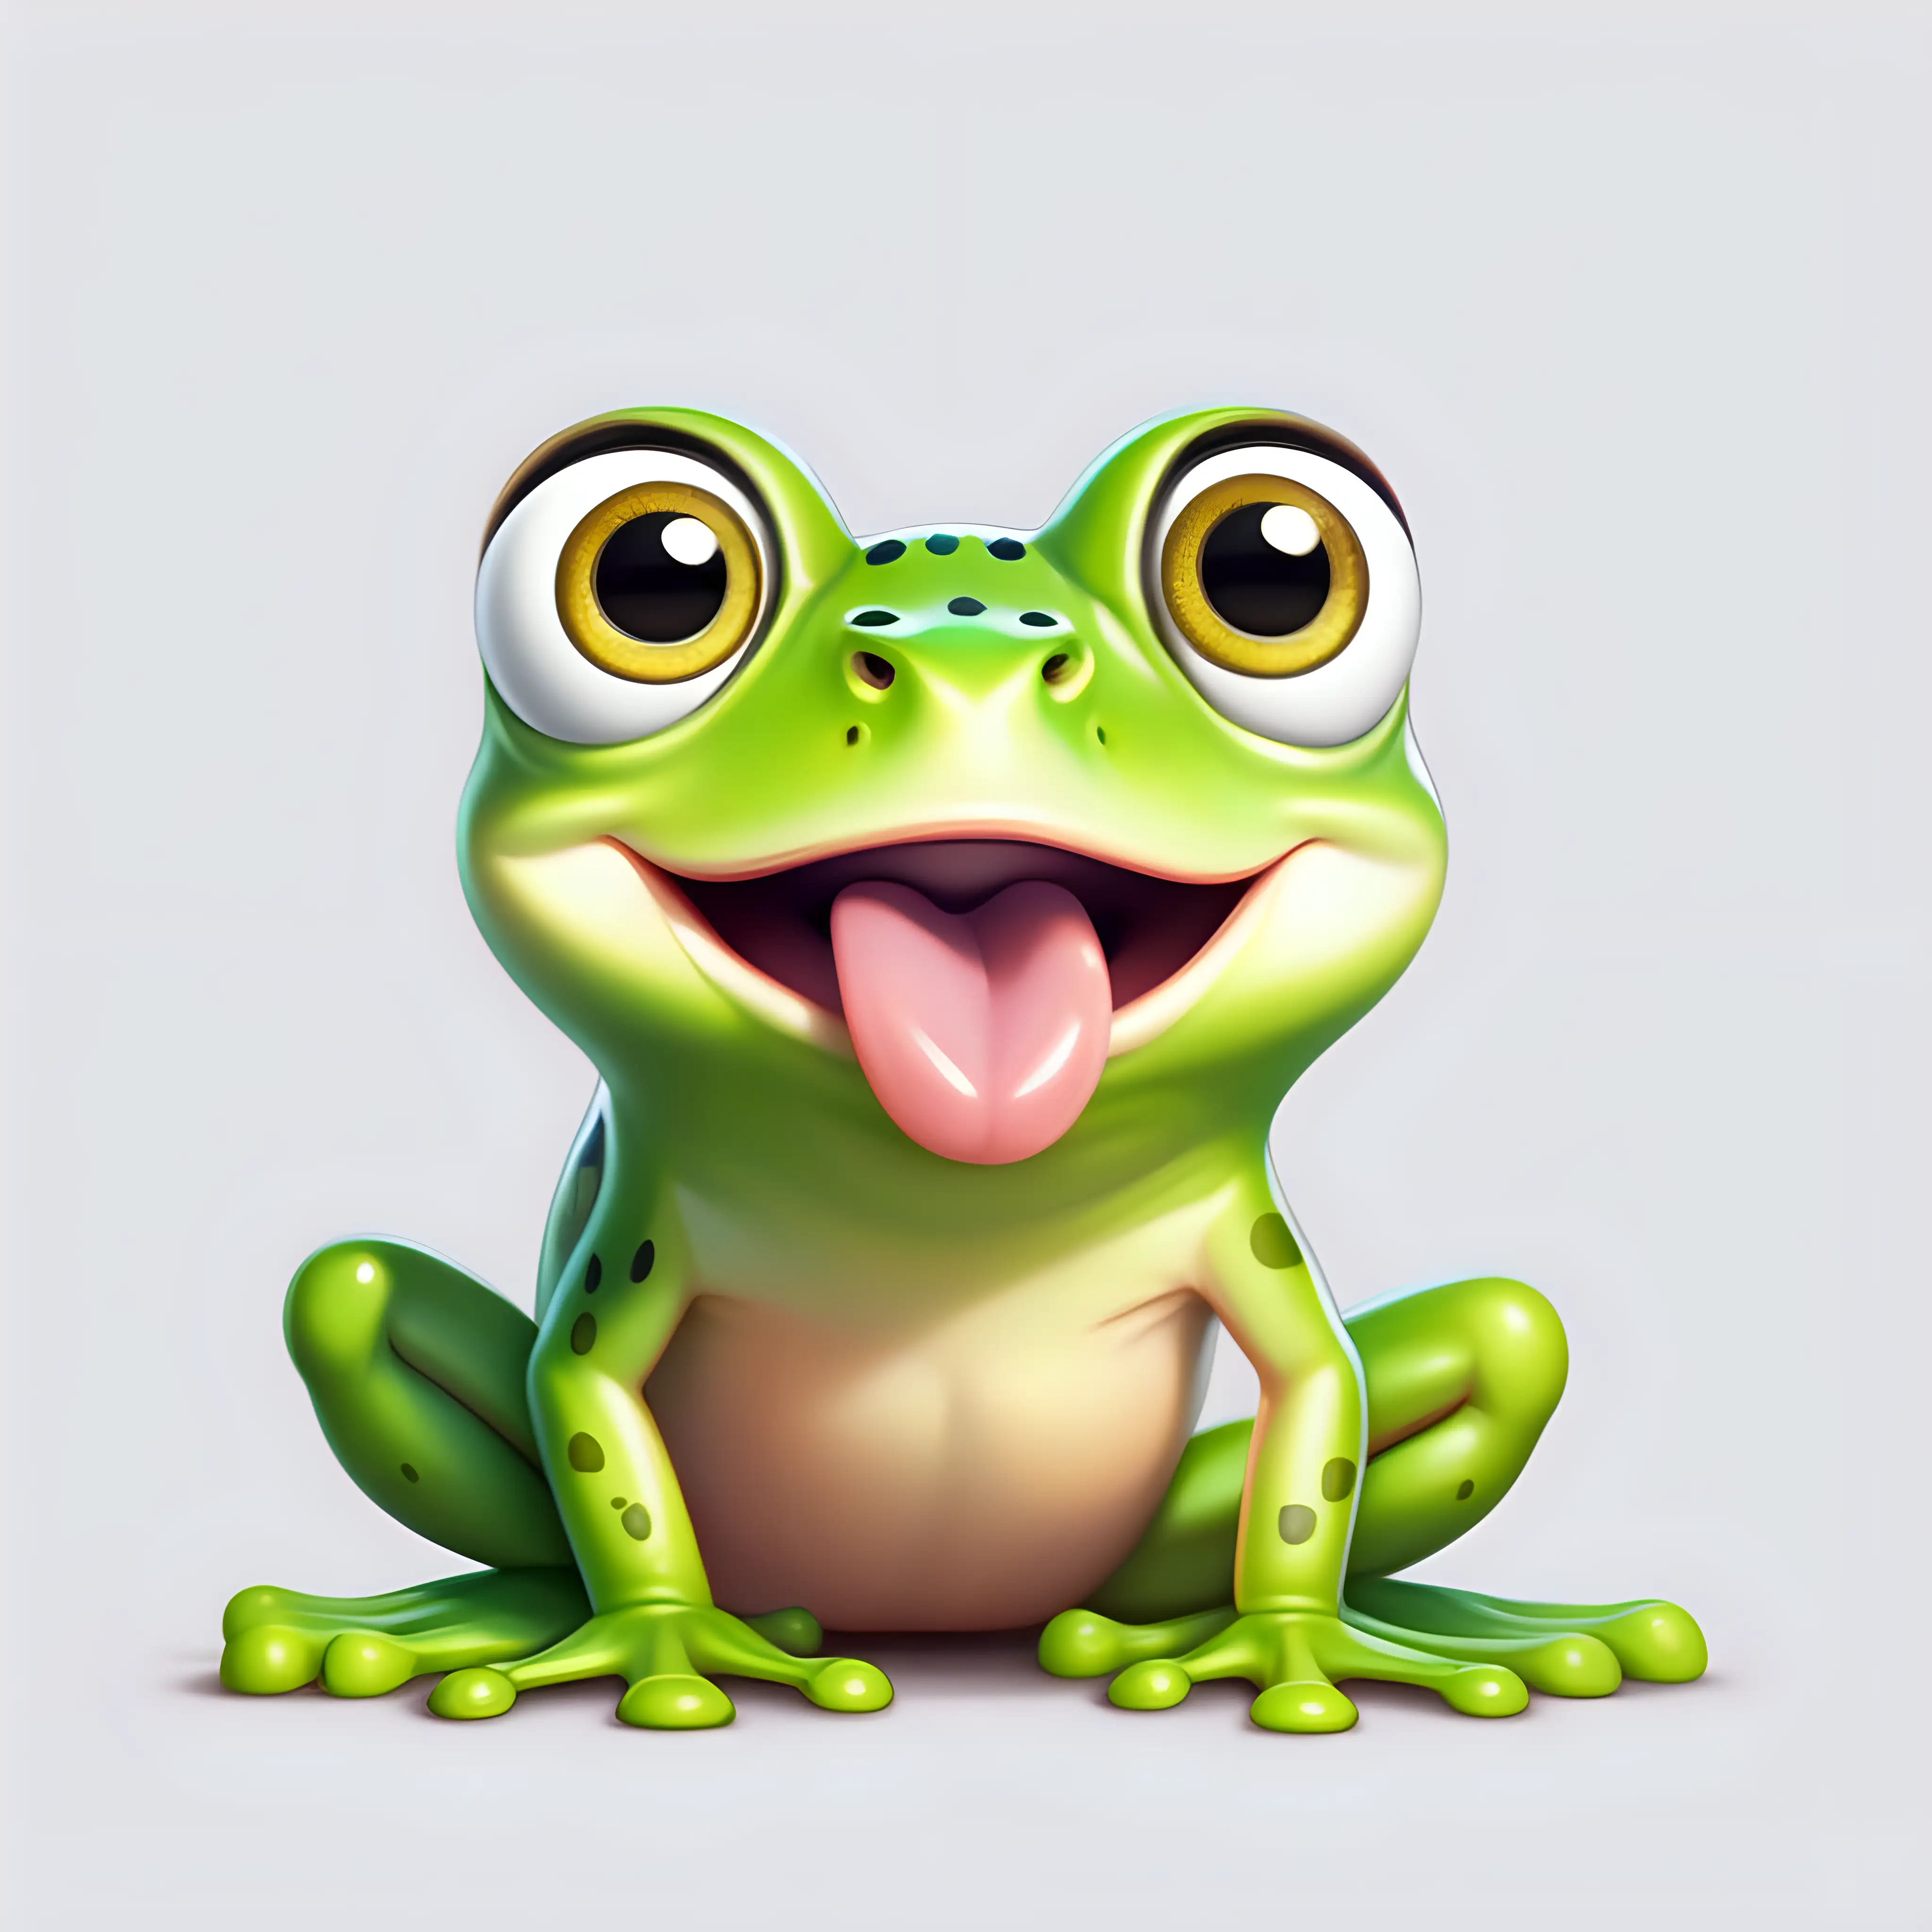 Generate a cute green frog, pixar carton style, tongue sticking out 